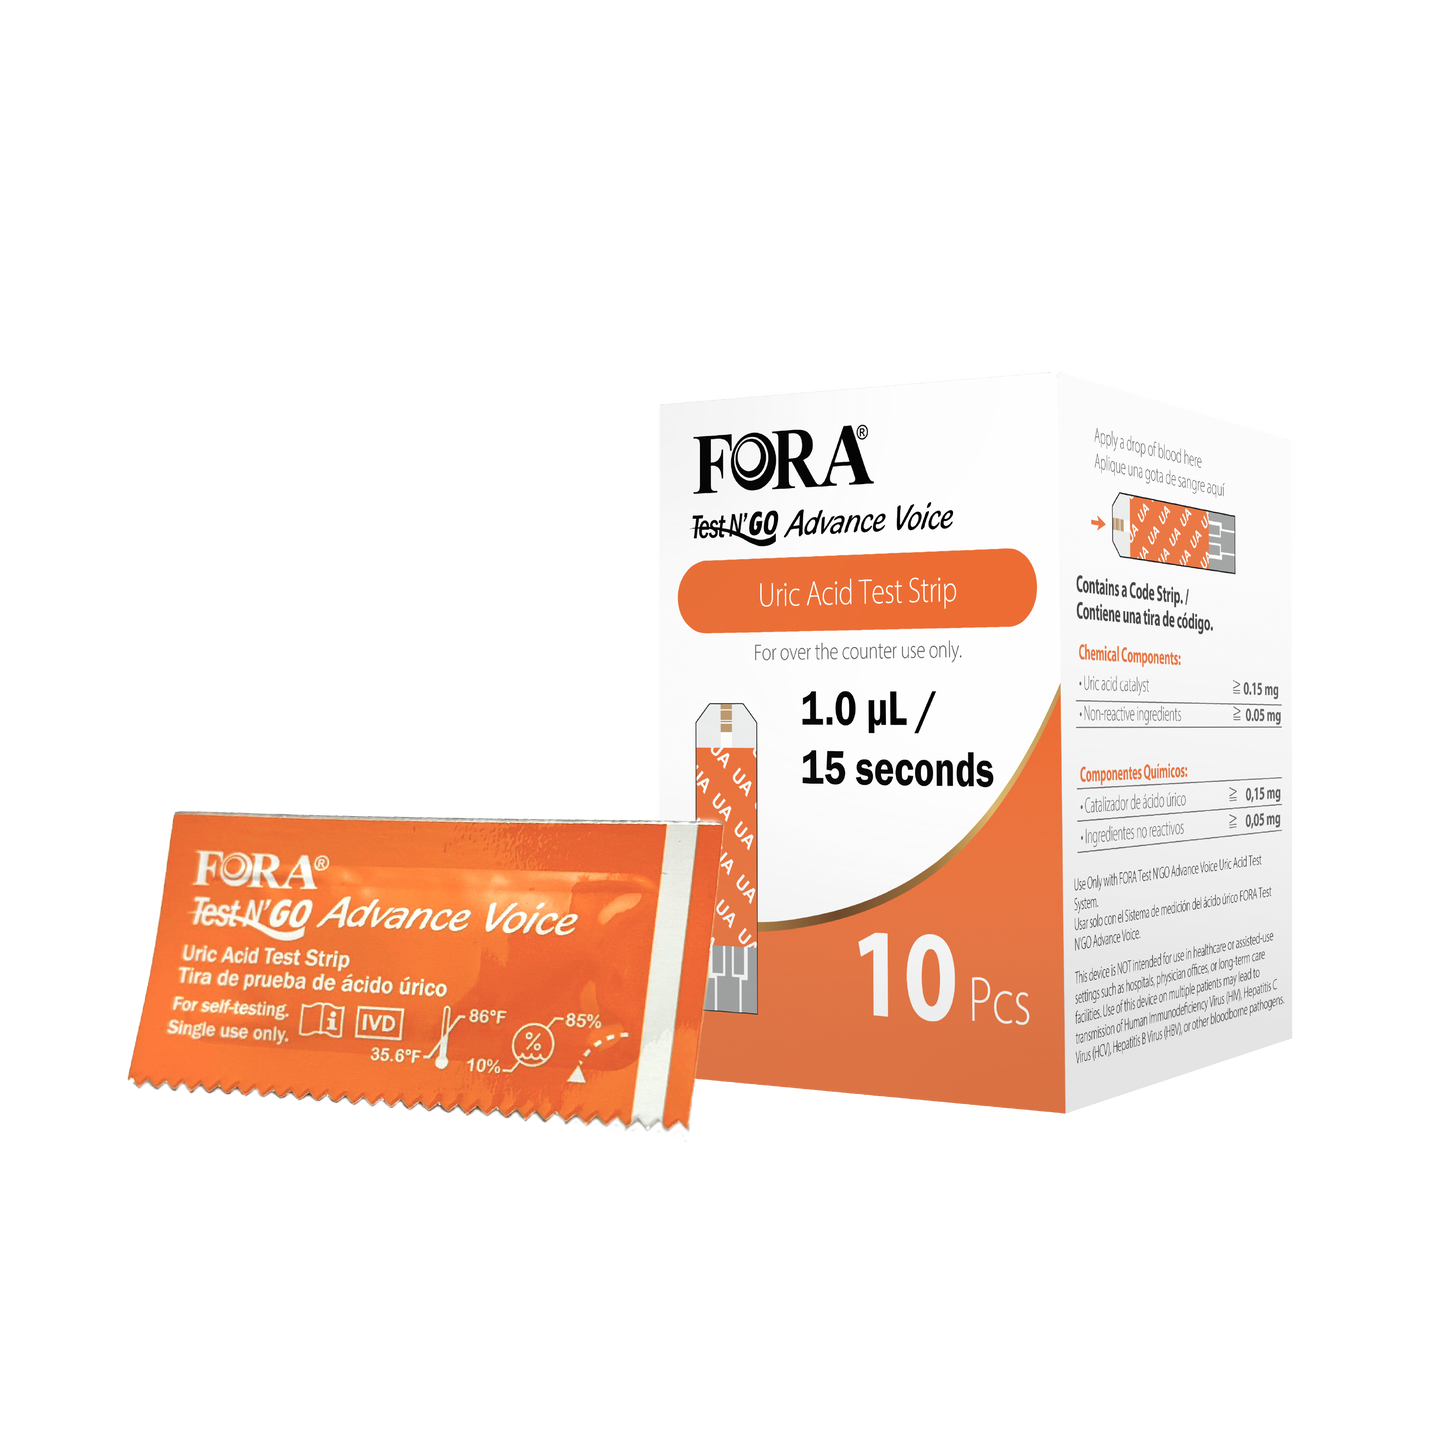 FORA Blood Uric Acid Test Strips (10pcs/box, Compatible with FORA Test N'Go Advance Voice Meter)